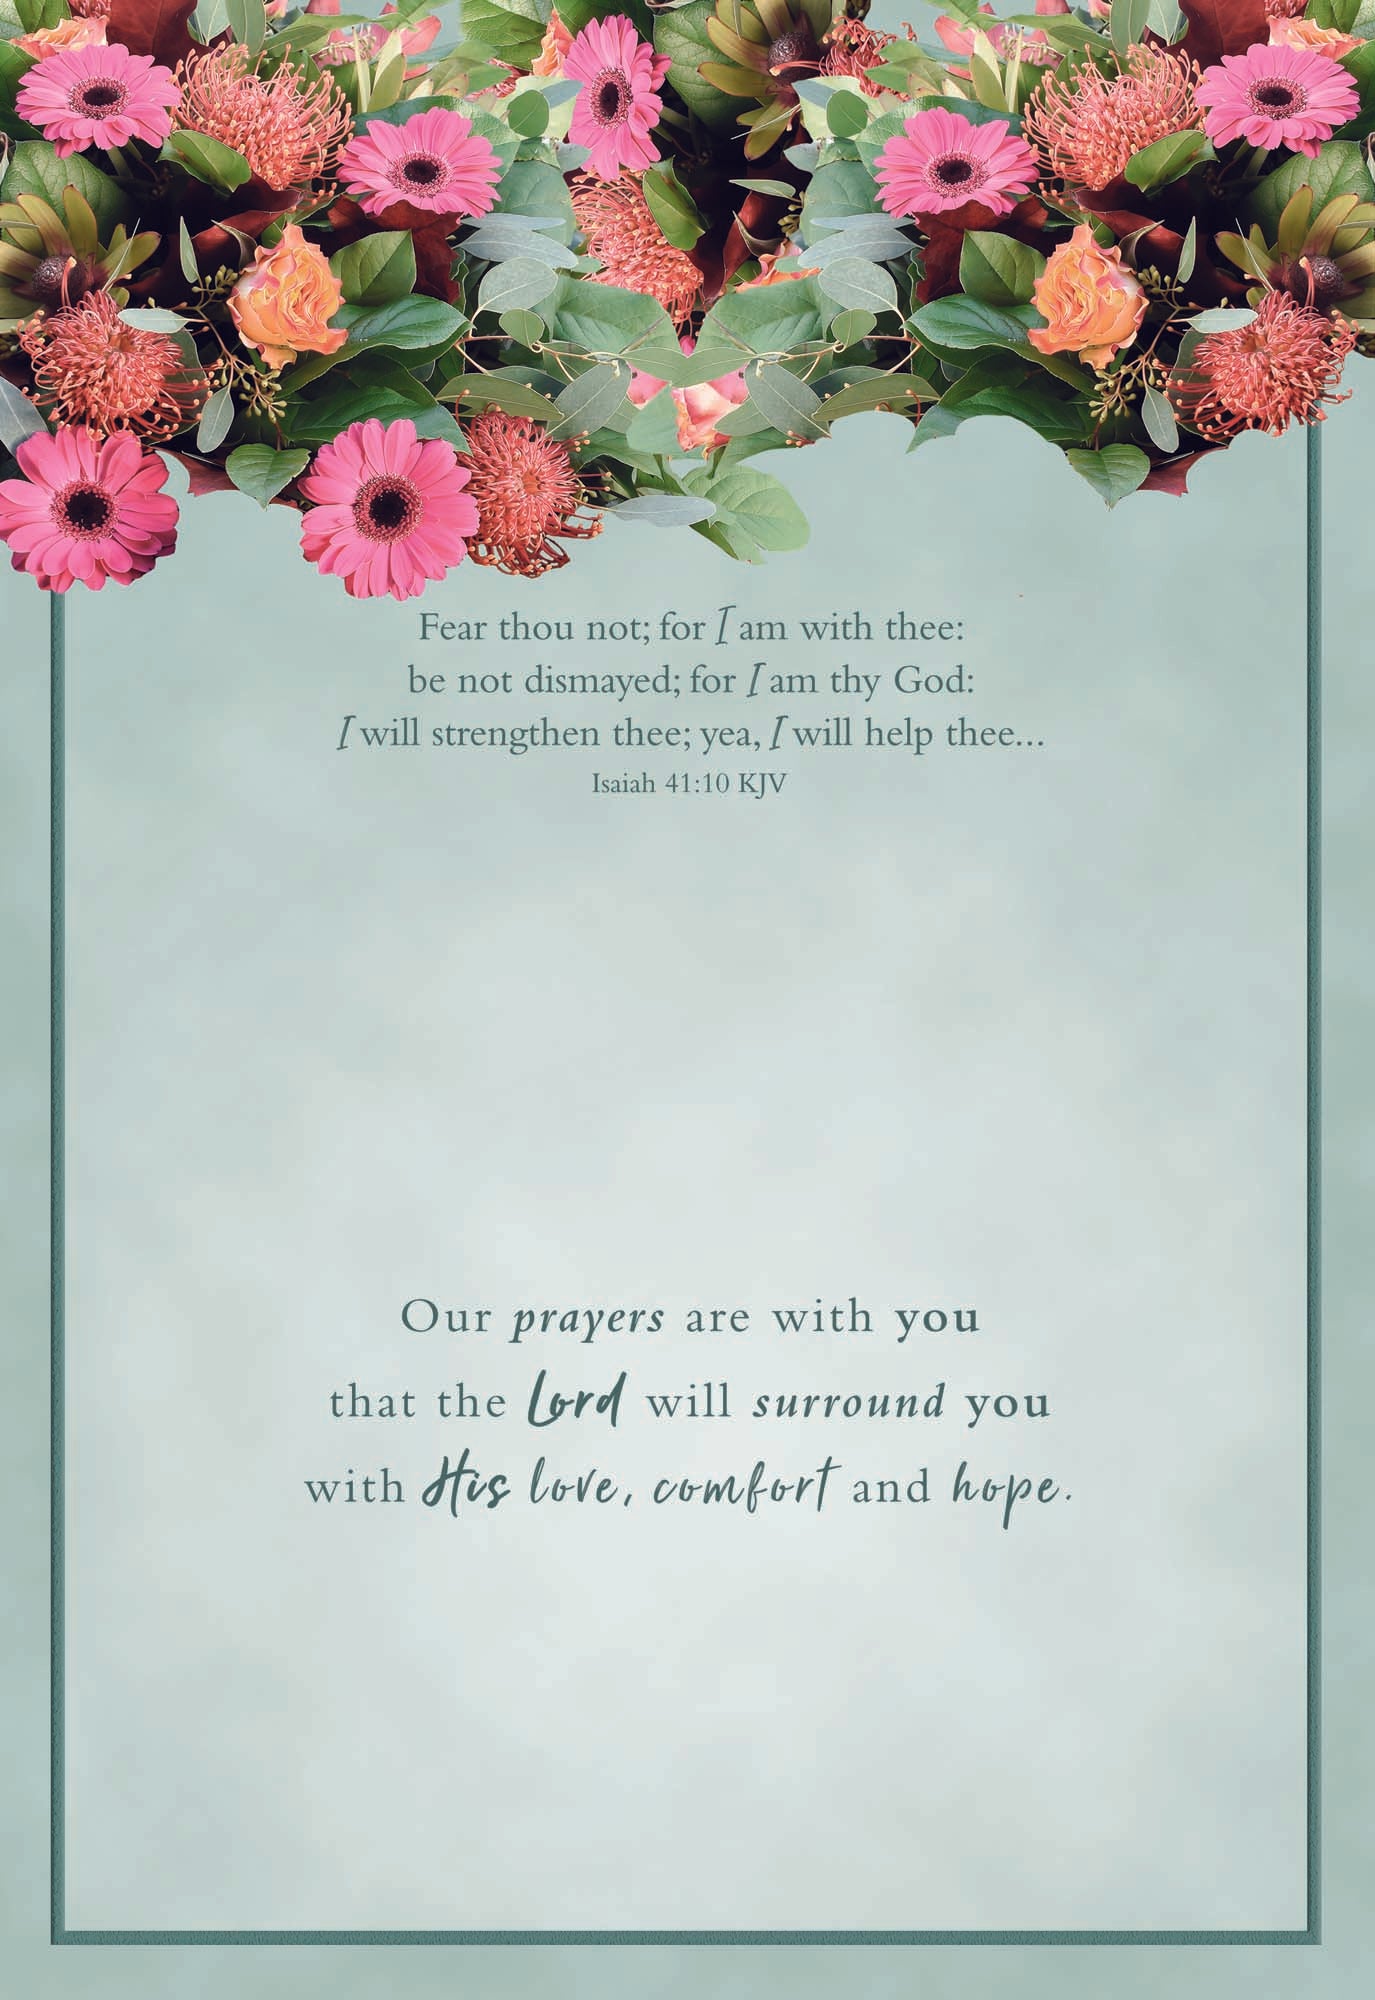 Expressions of Sympathy Assort - Assorted Sympathy Cards, Box of 24